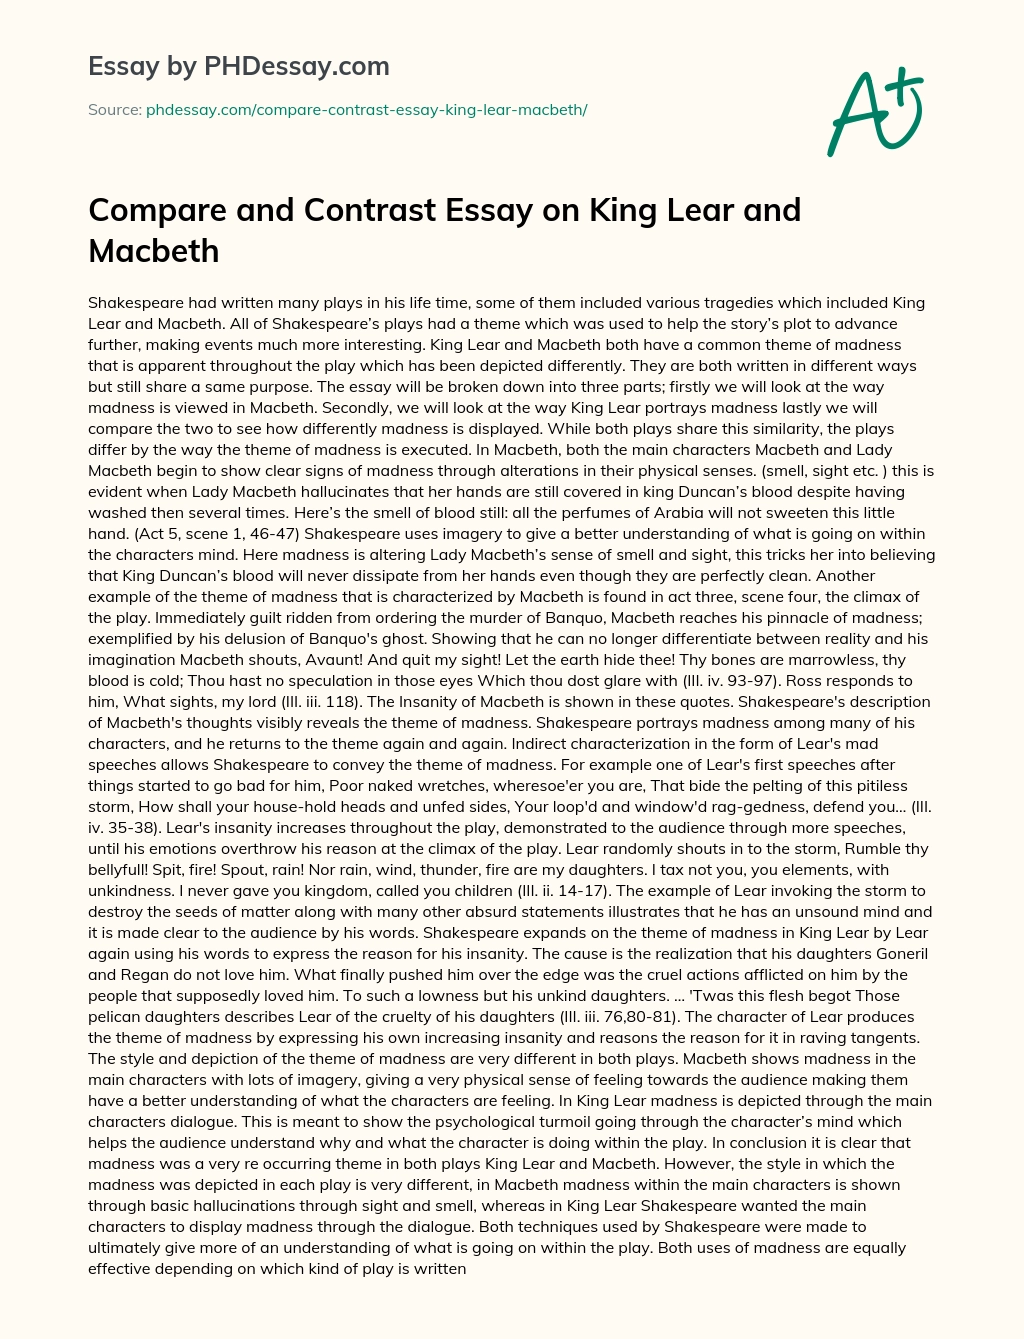 Compare and Contrast Essay on King Lear and Macbeth essay